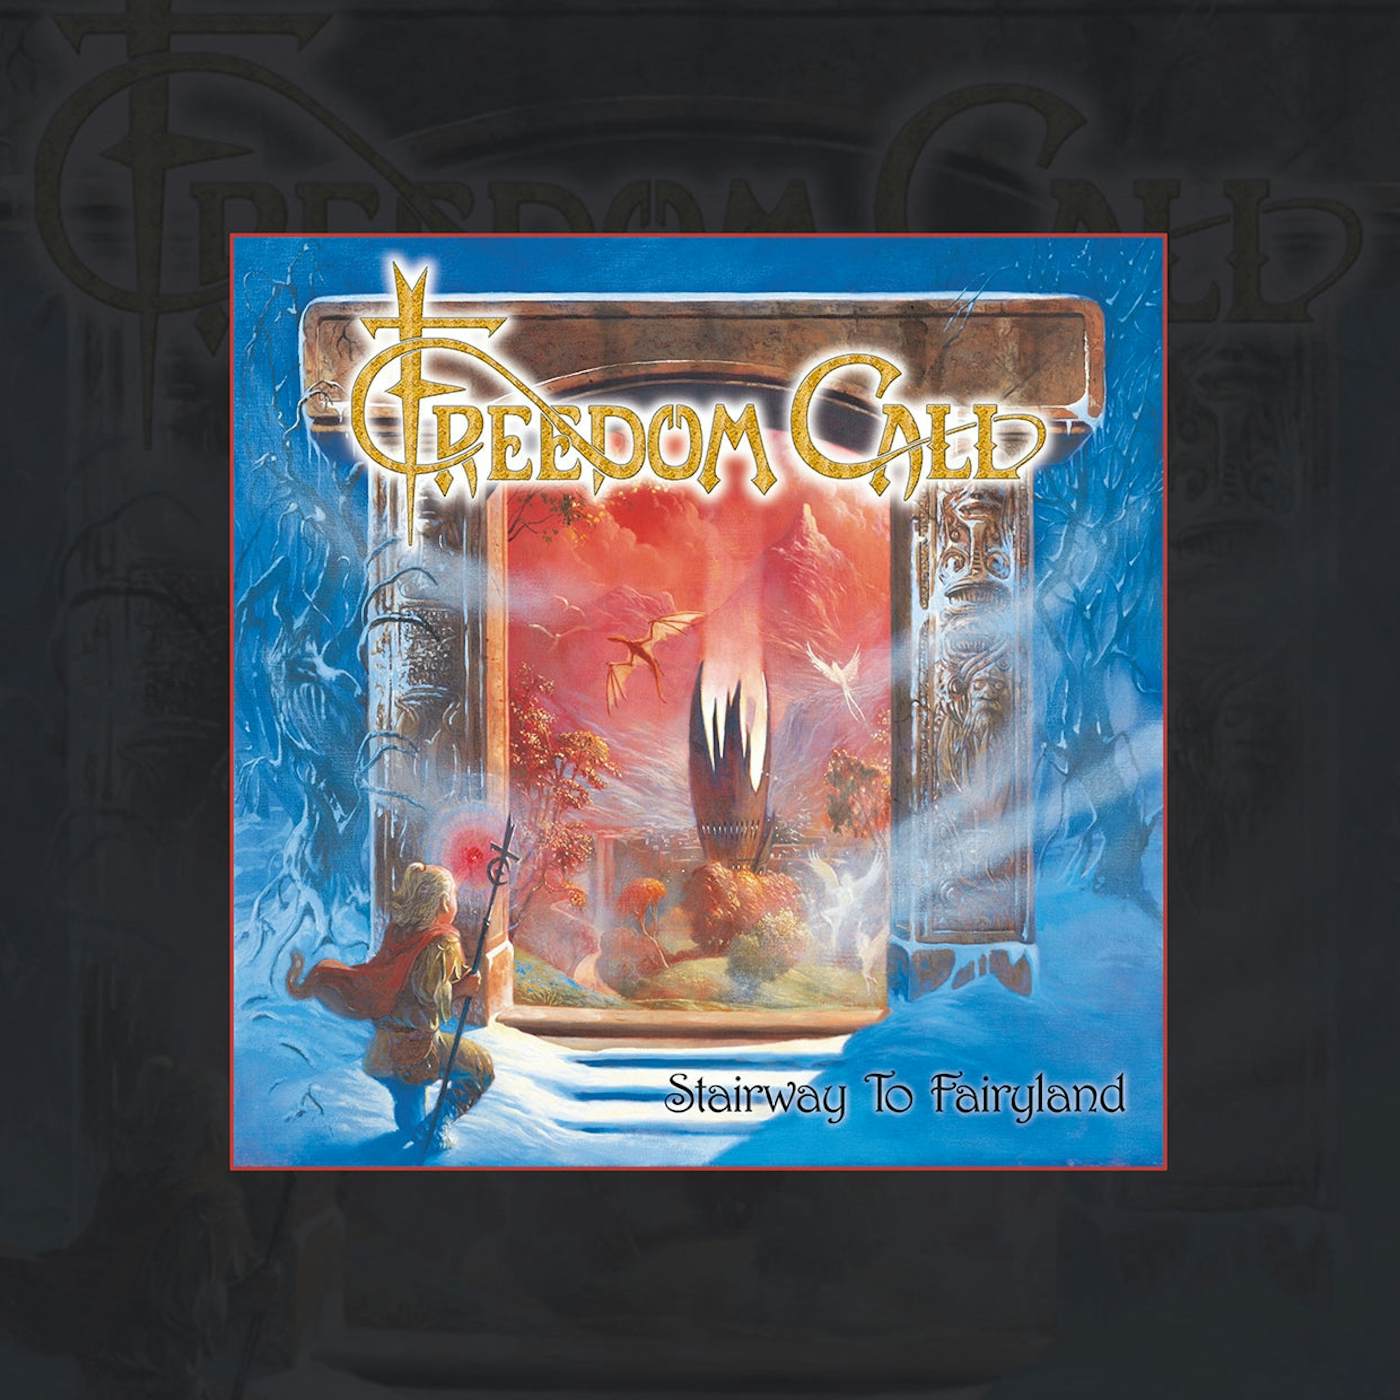 Freedom Call LP - Stairway To Fairyland (Lp+Cd)